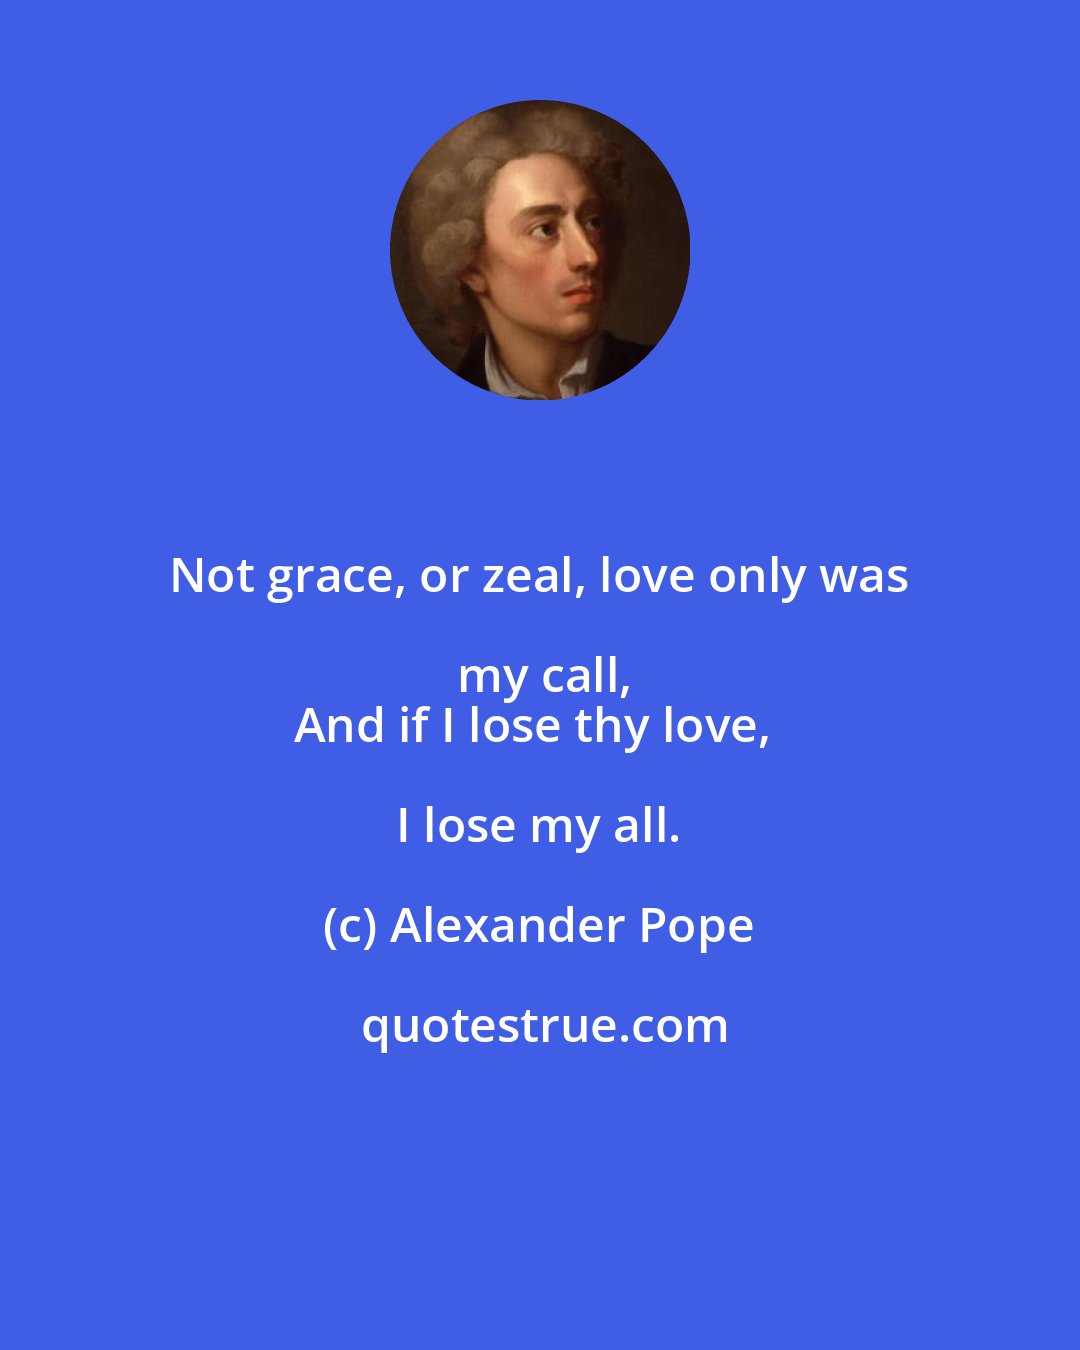 Alexander Pope: Not grace, or zeal, love only was my call,
And if I lose thy love, I lose my all.